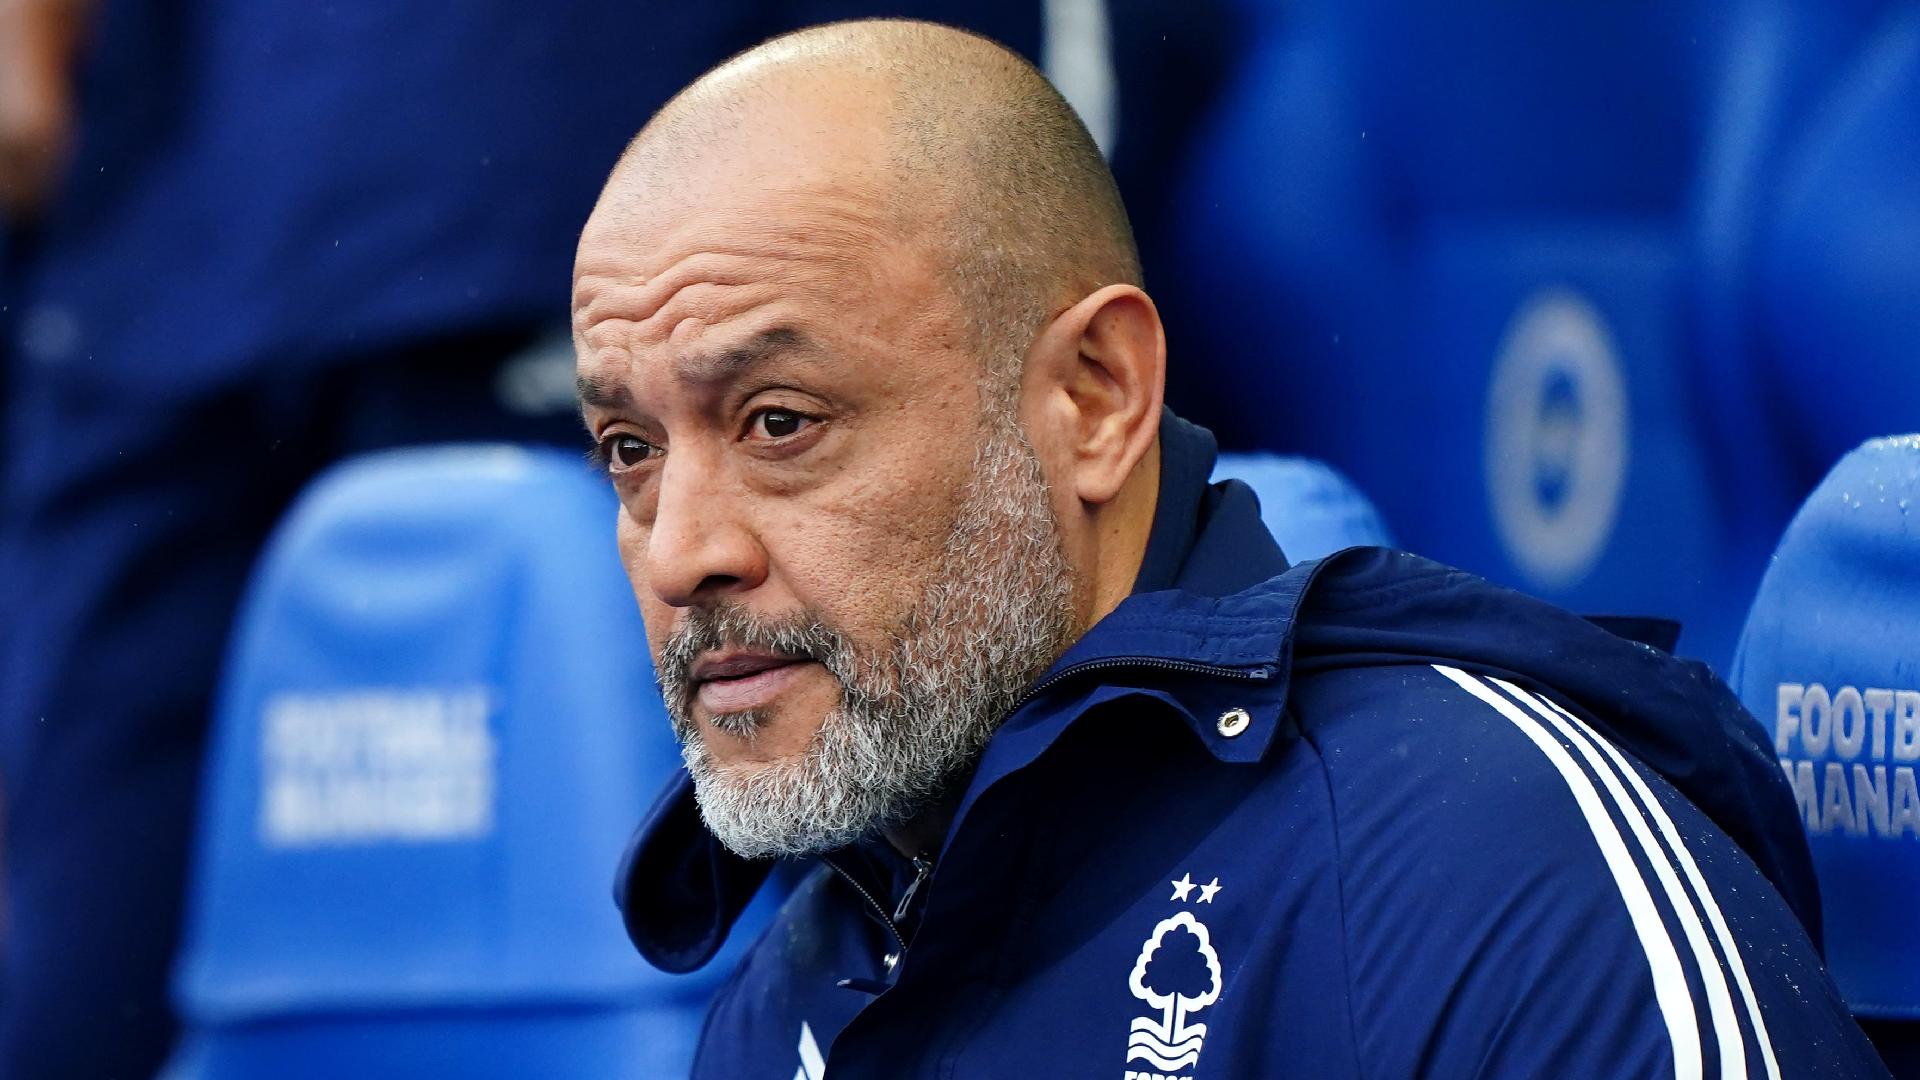 If It’s Possible I will Terminate My Contract Deal: Nottingham Forest Head Coach Nuno Espirito Santo Firmly Denies Allegations, Asserts Refusal to Accept Pay Cut